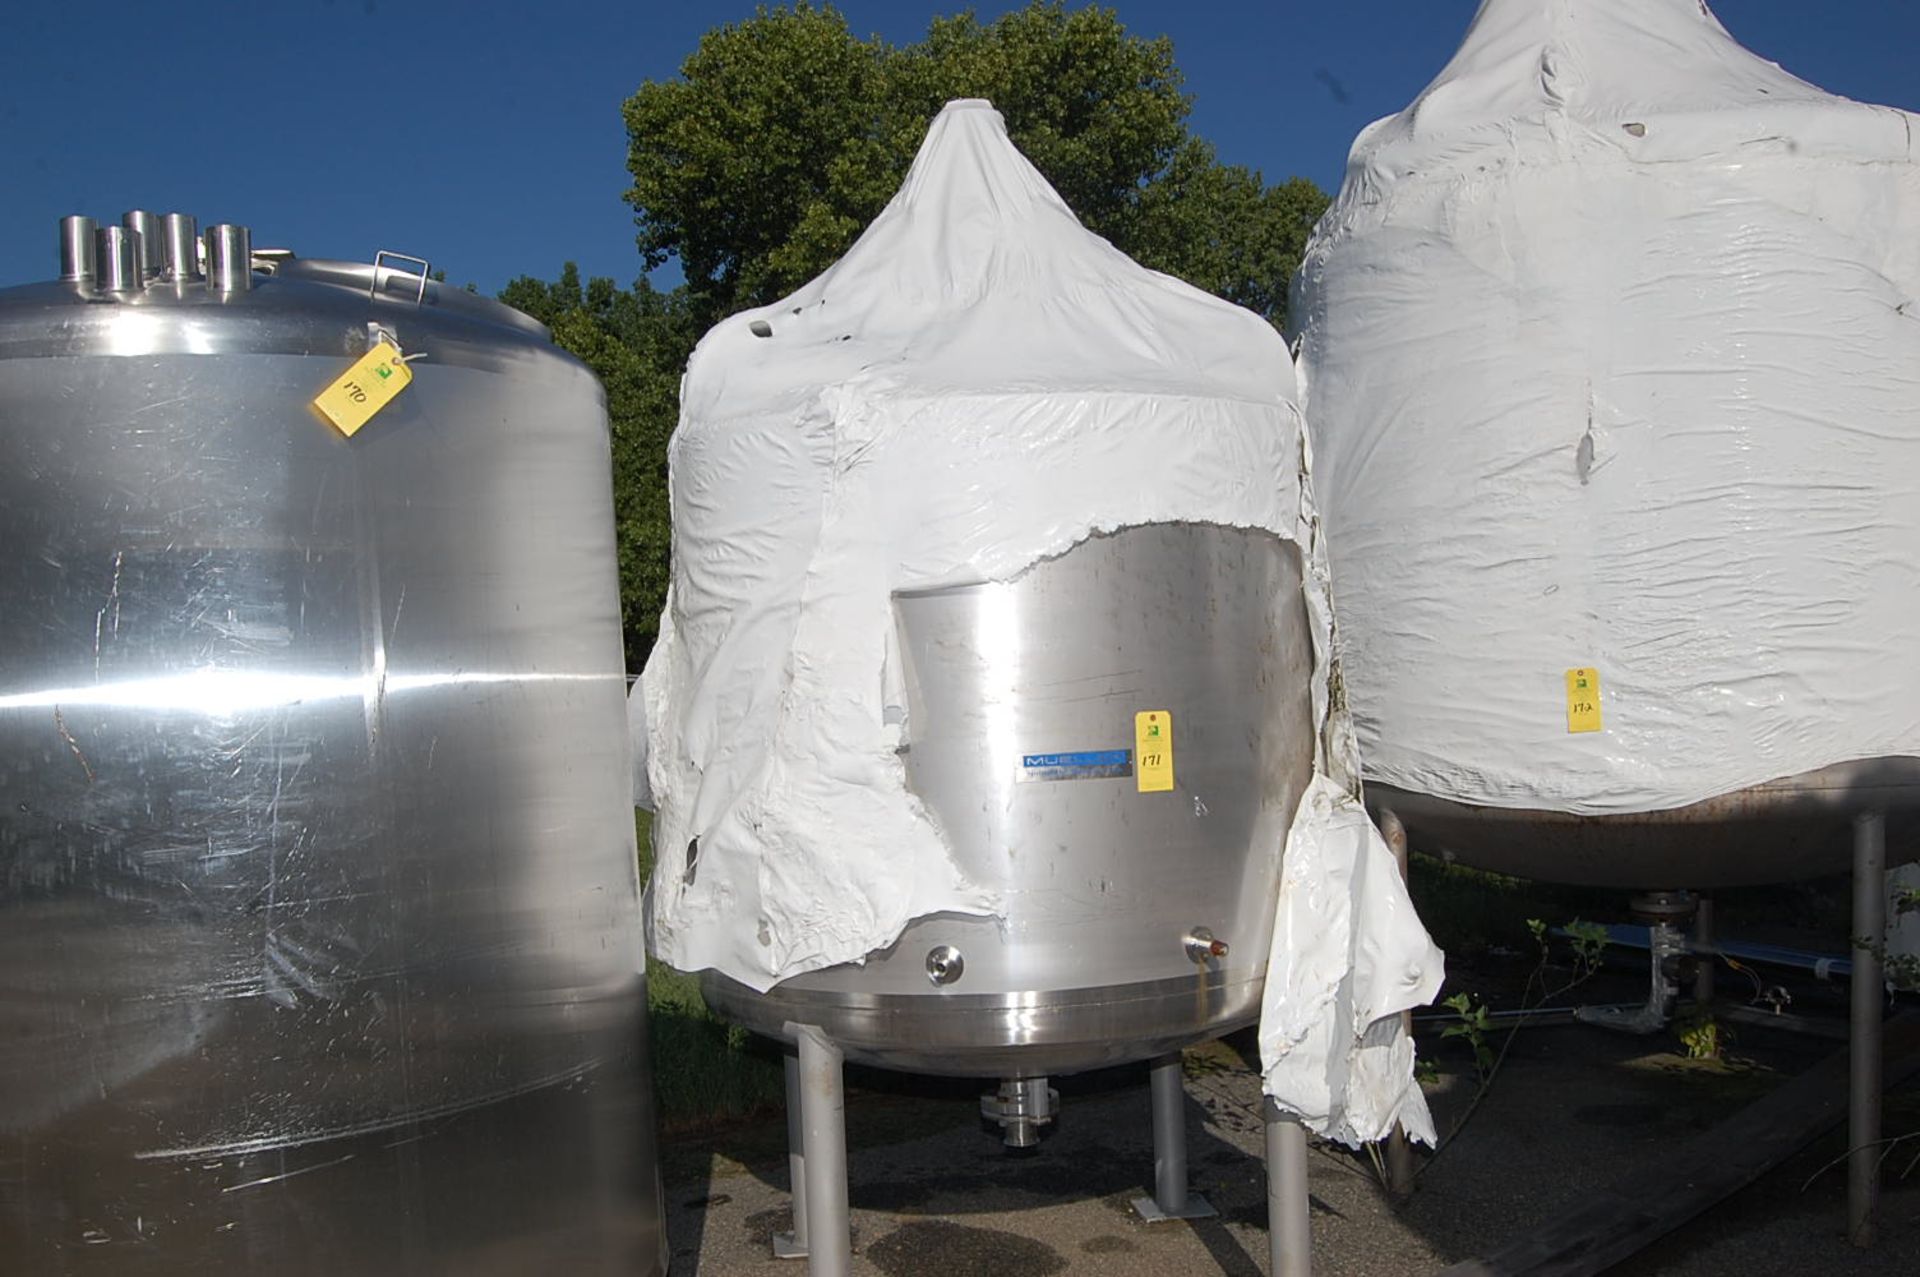 Mueller SS Tank, Jacketed, 500 Gallon Capacity, SN 197274-2, Includes Mixer/Agitator - Rigging Fee $